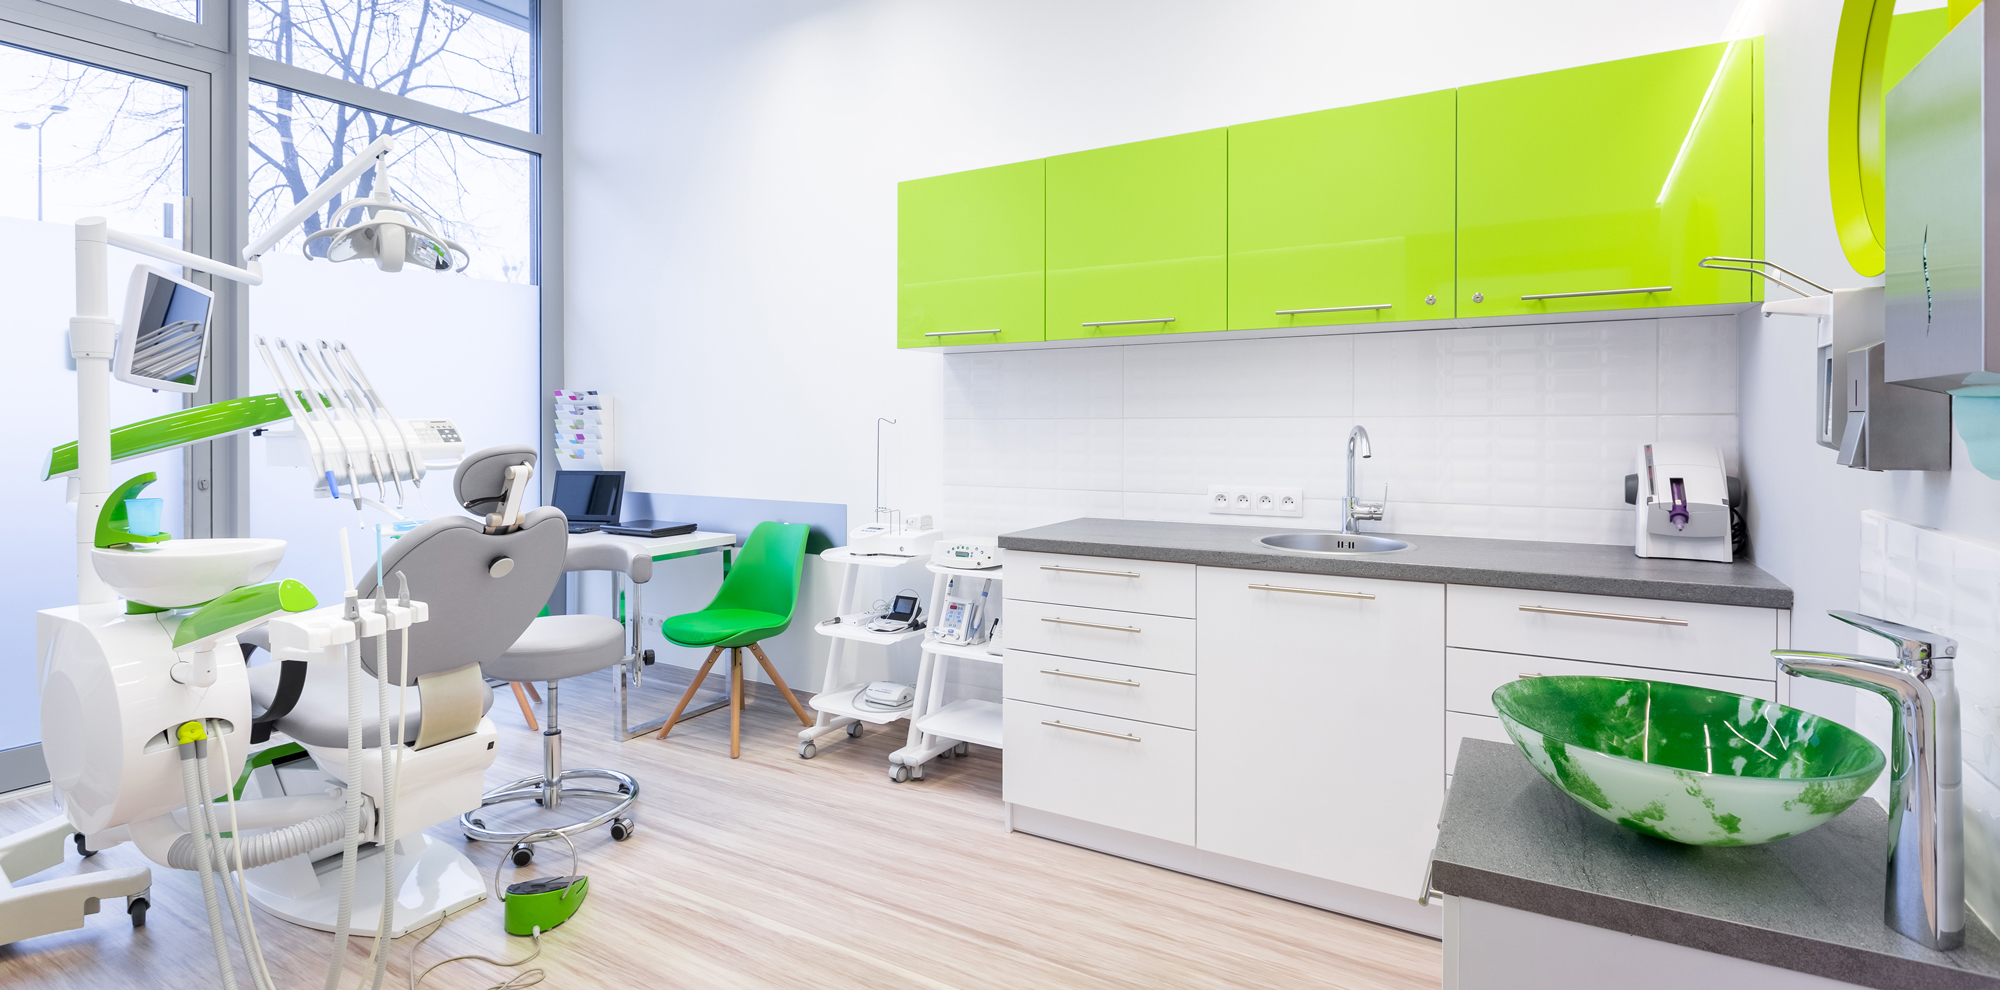 Popular Colors Trends for Medical Offices